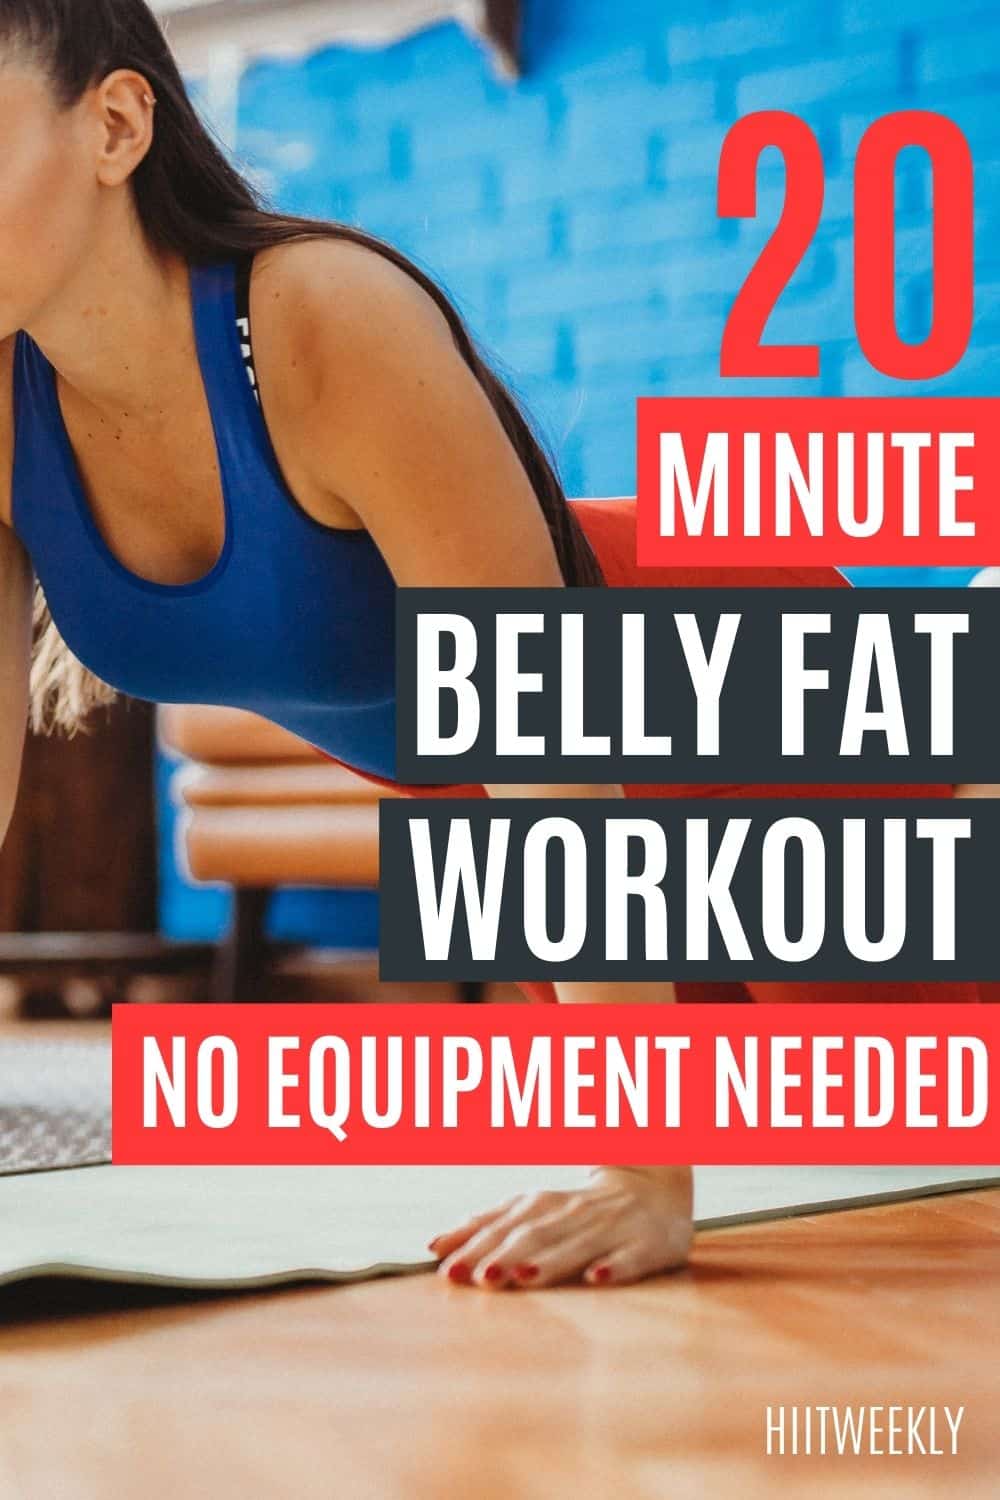 Quick 20 Minute Home Belly Fat Workout | No Equipment | HIITWEEKLY